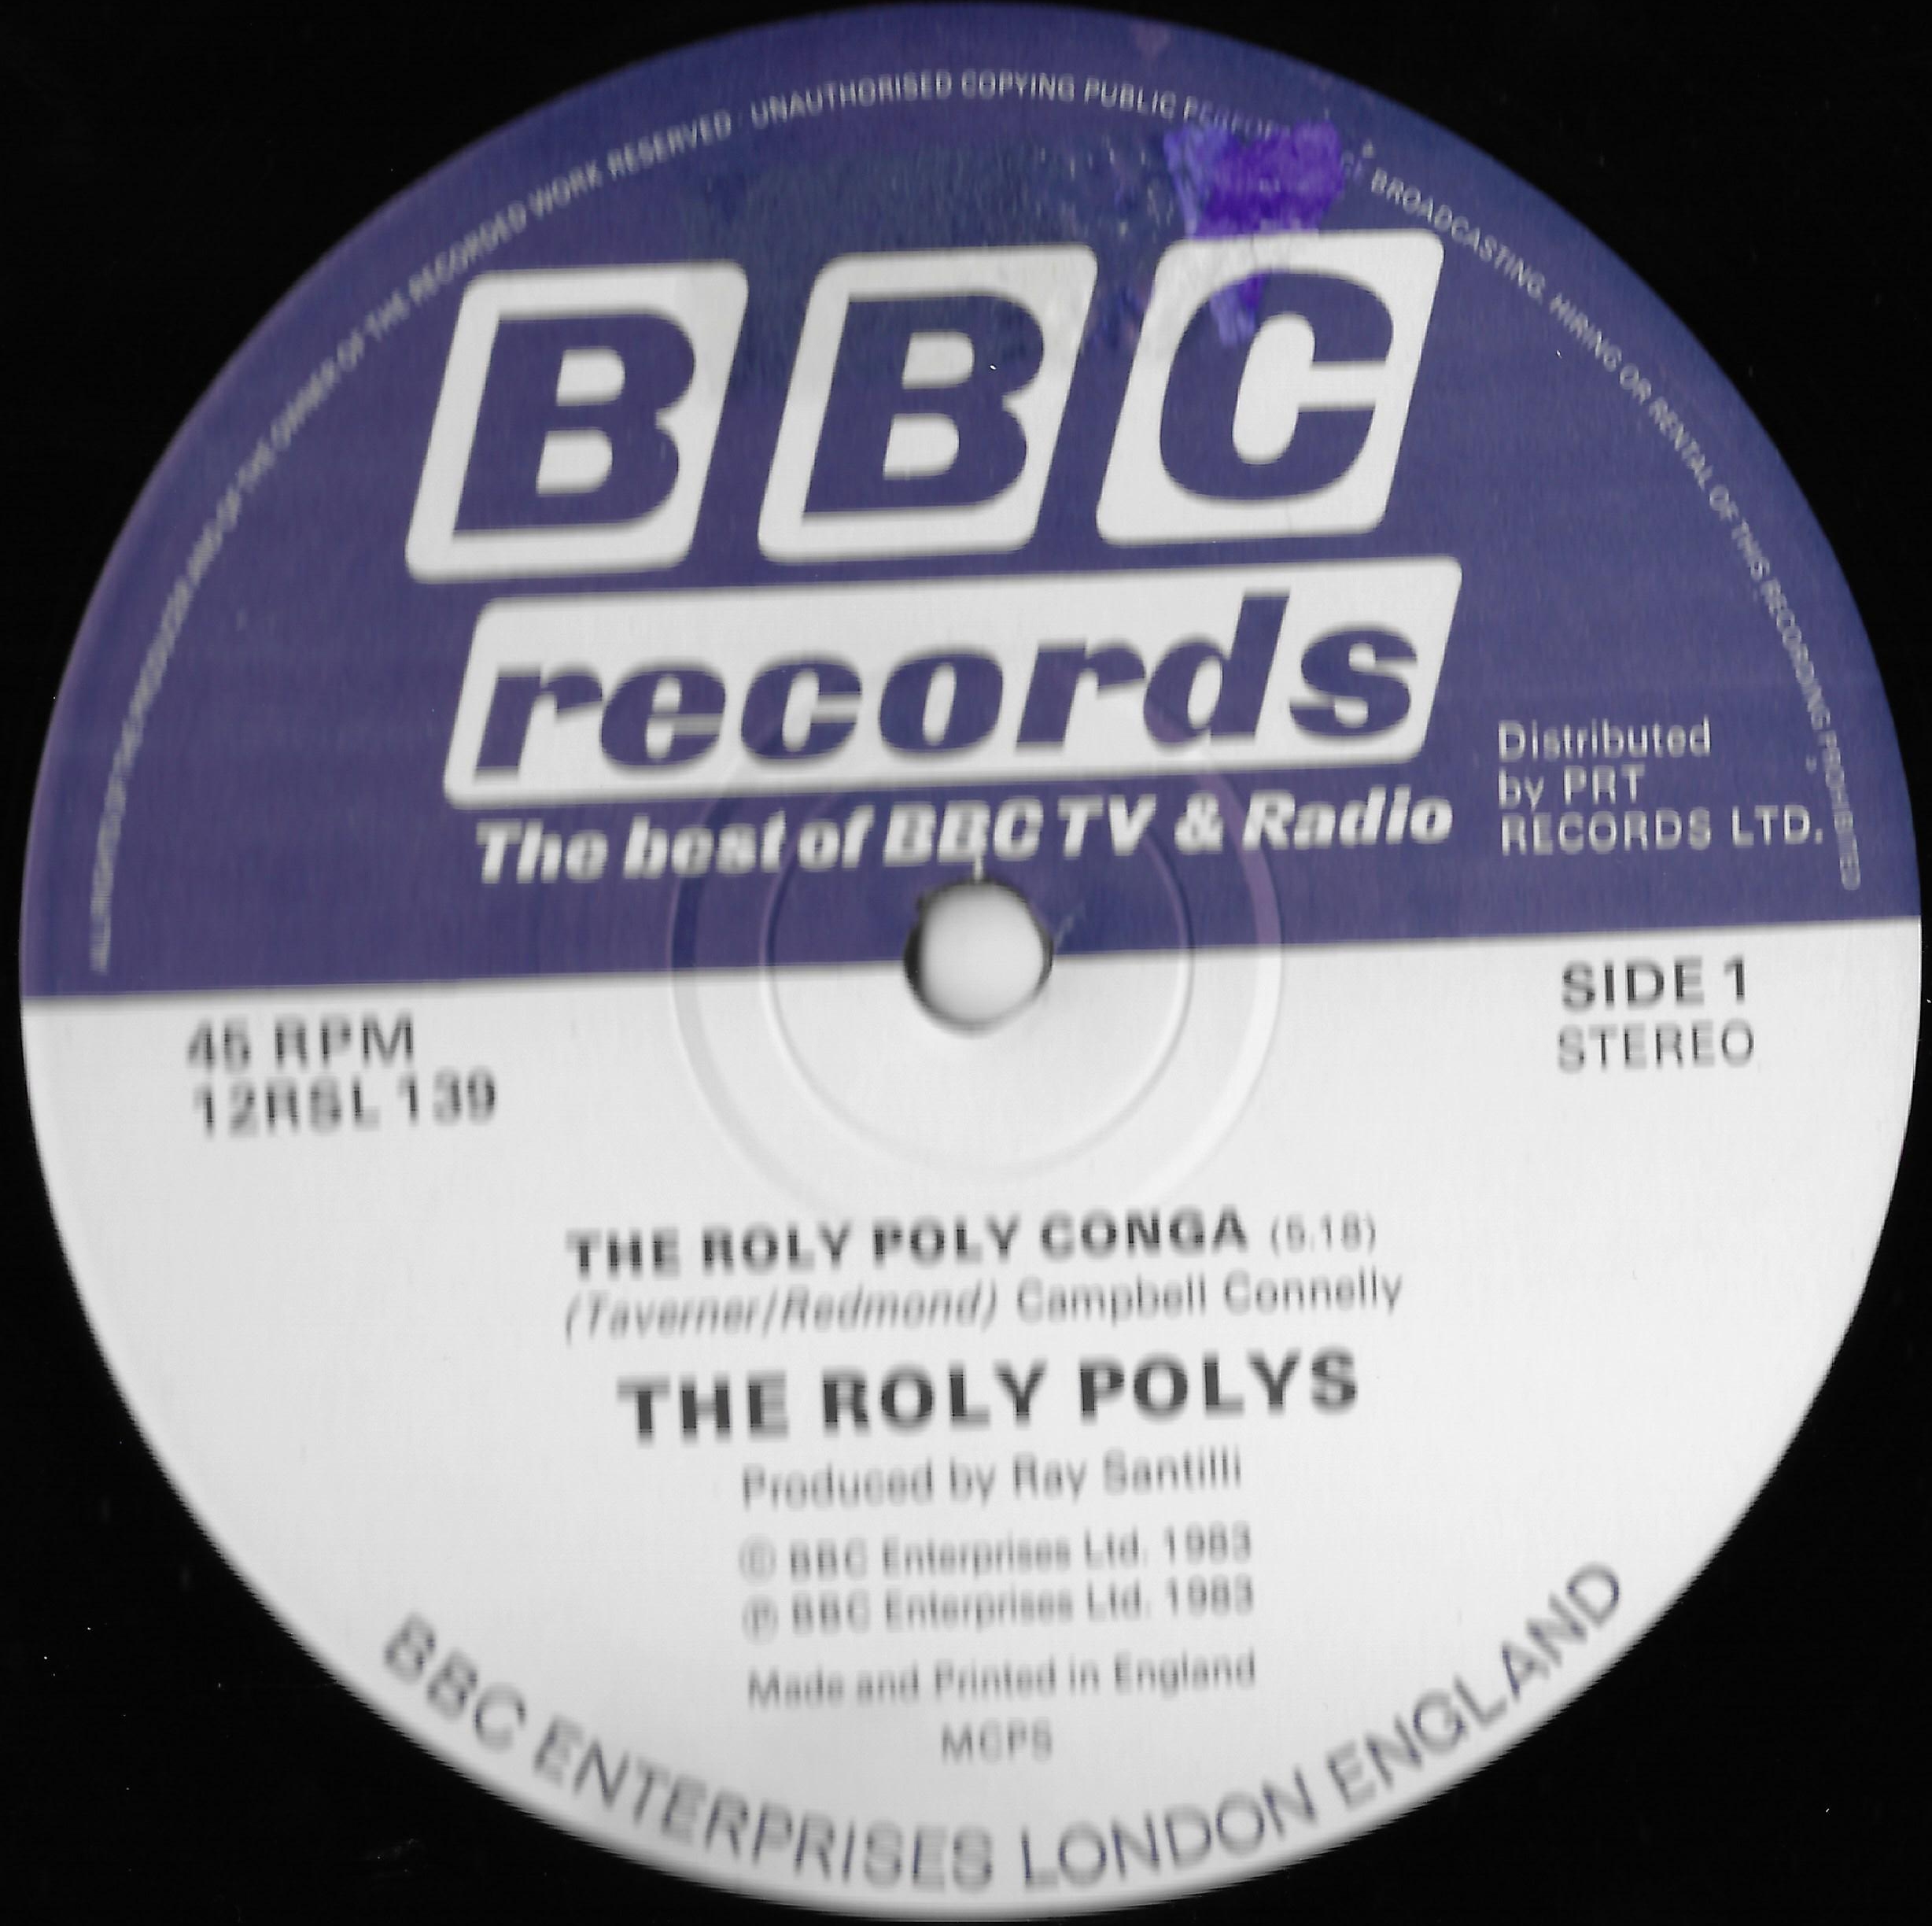 First BBC 12 inches label